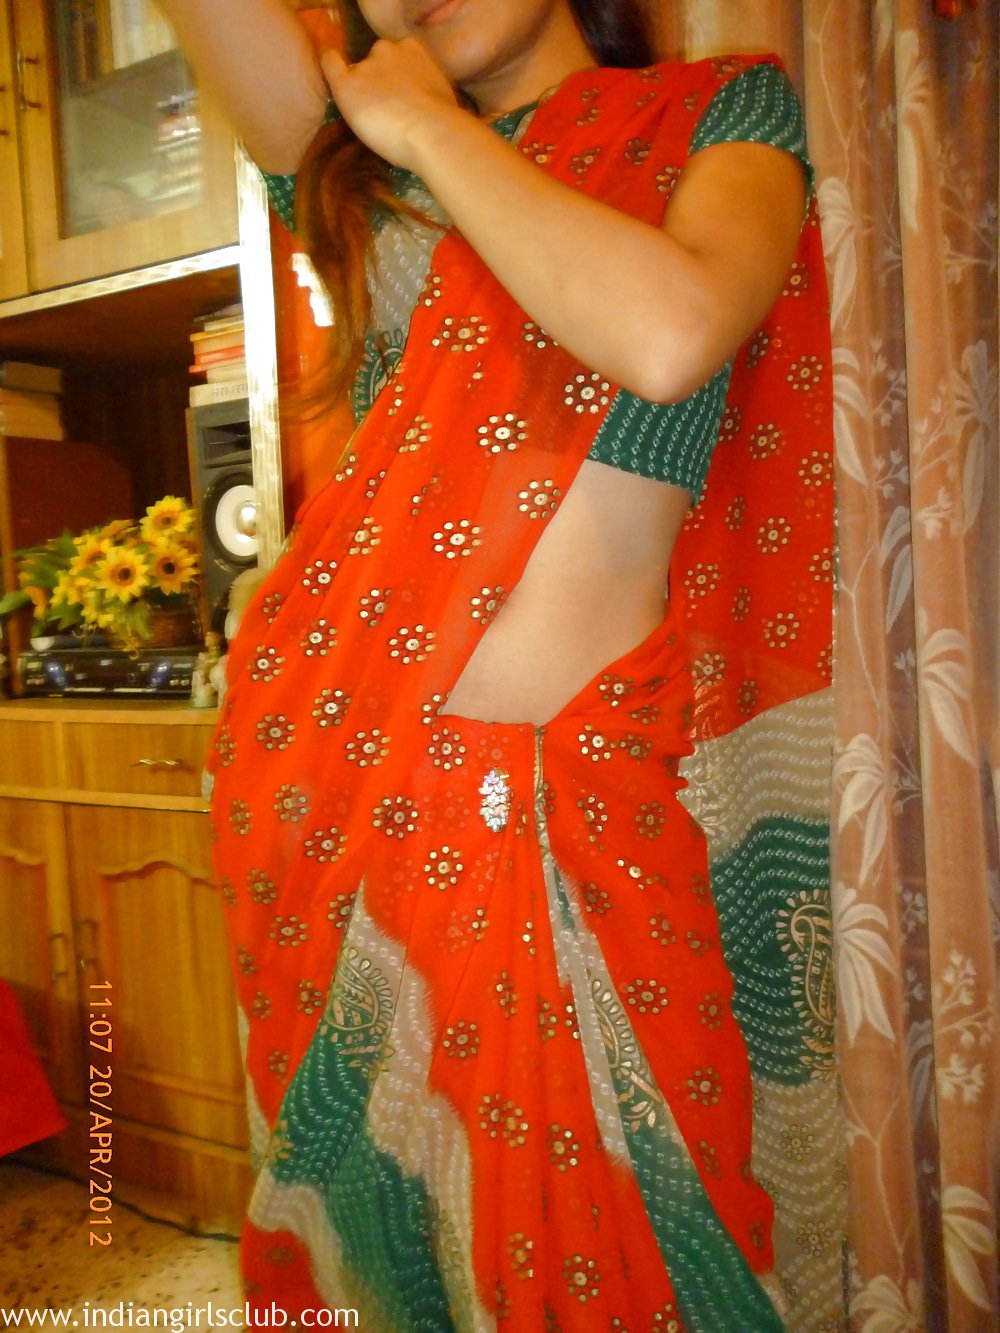 Sex Photos Of Indian Wife In Saree Getting Naked In Bedroom photo